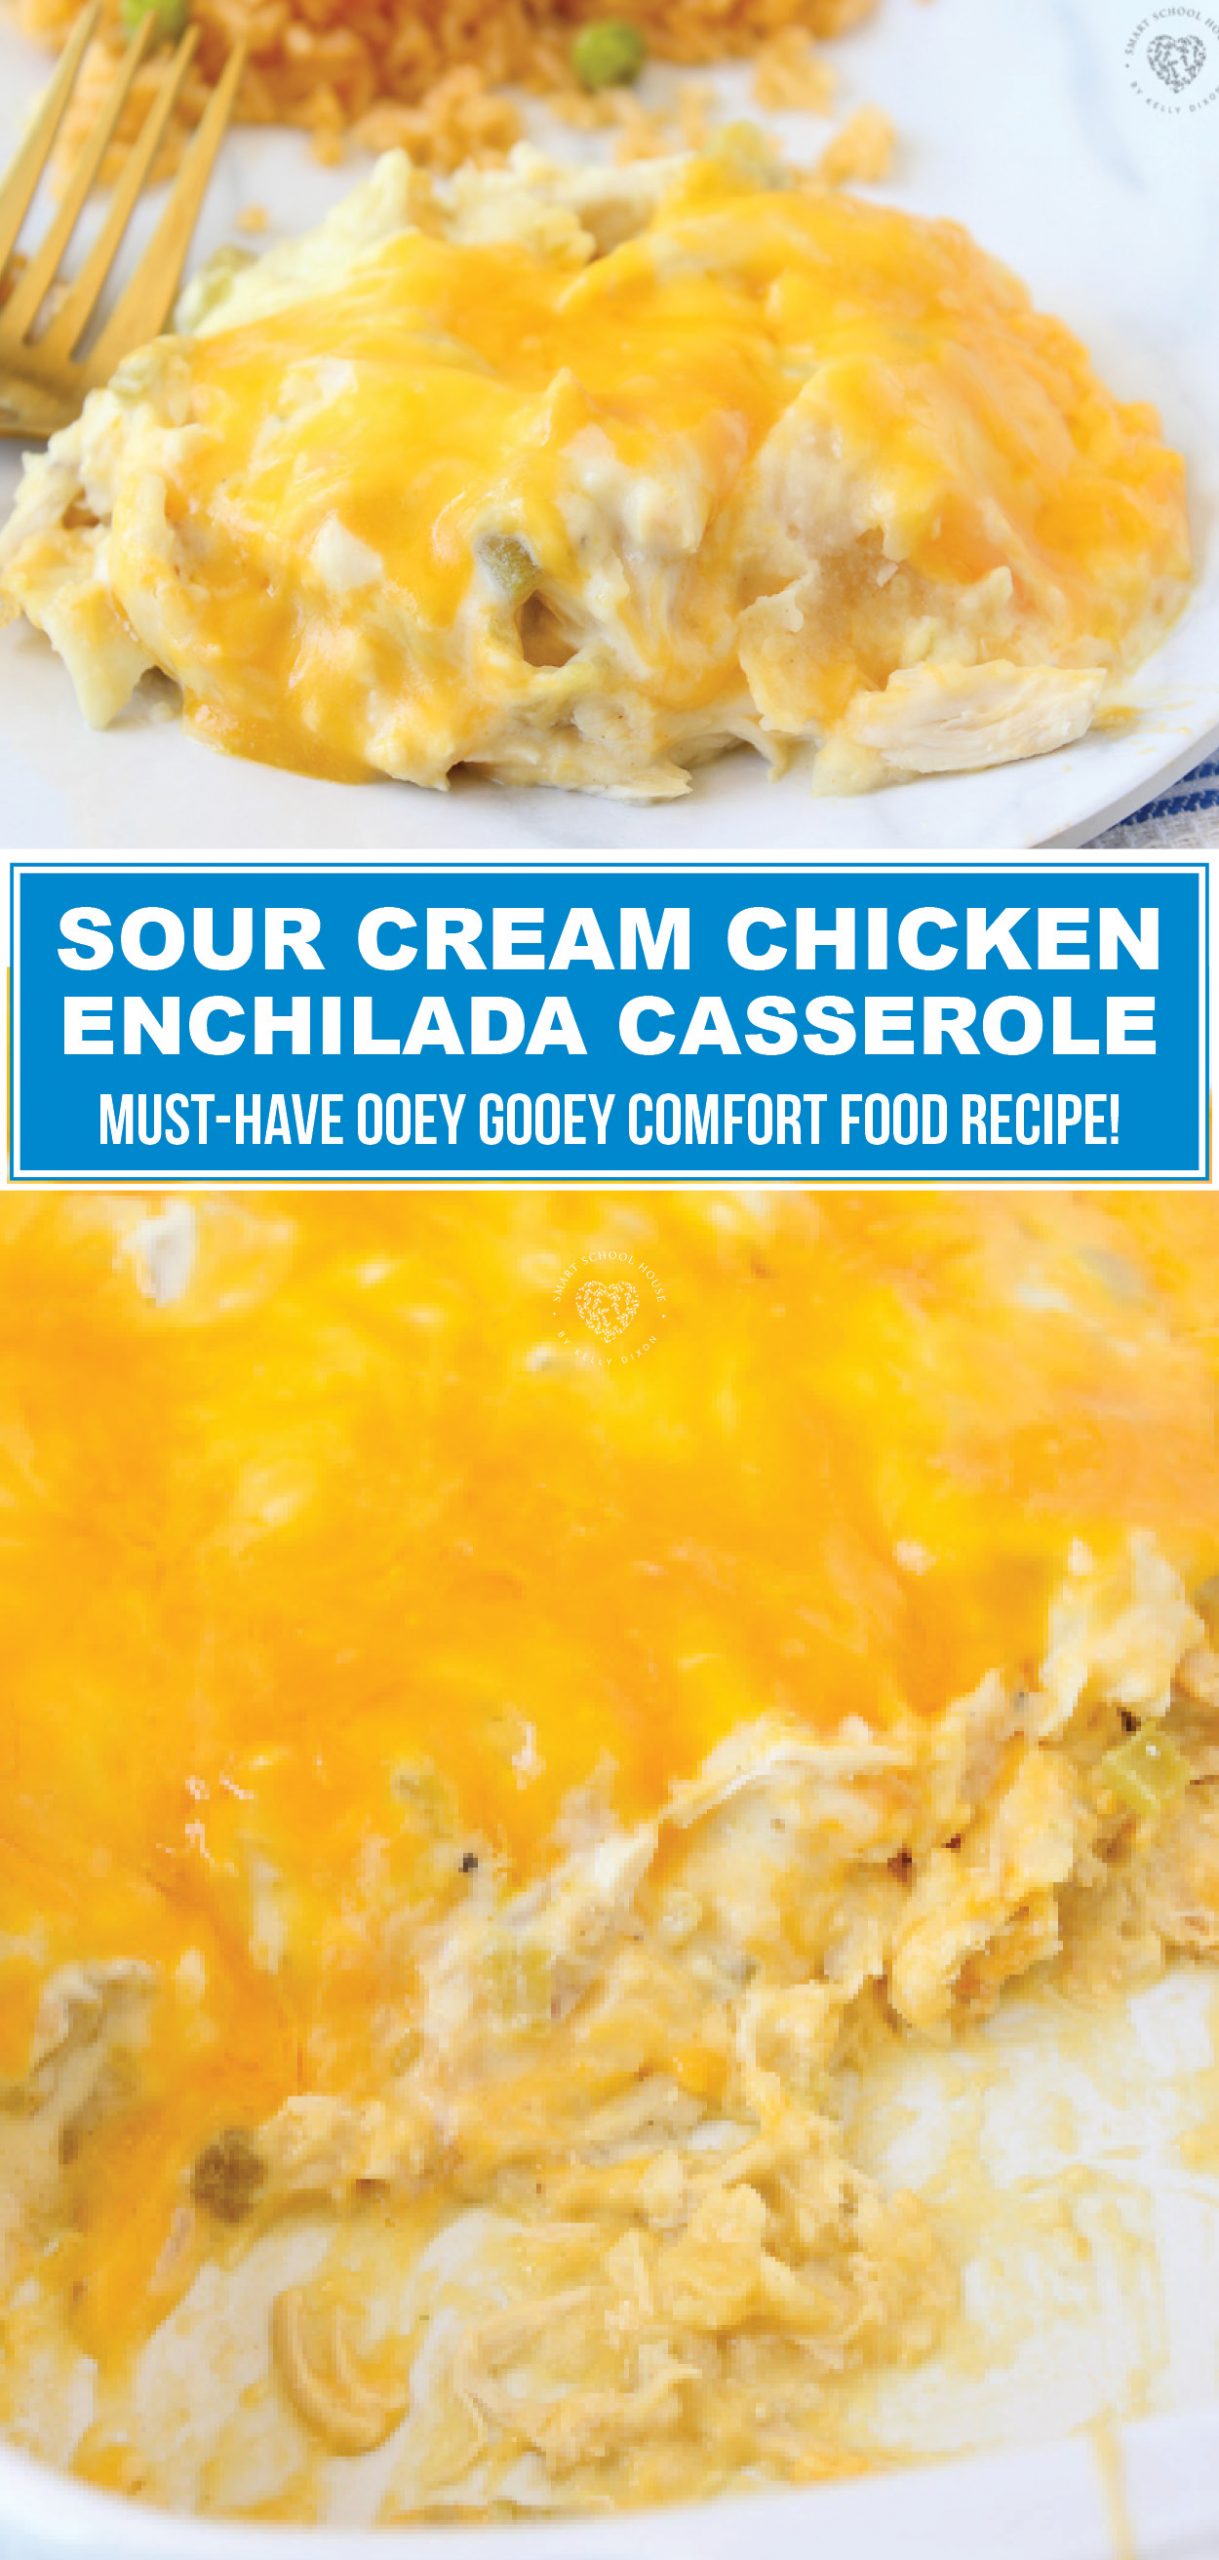 Sour Cream Chicken Enchilada Casserole - These are the same ingredients used to make chicken enchiladas, but easier than rolling up a bunch of tortillas. Great for lazy people like me!